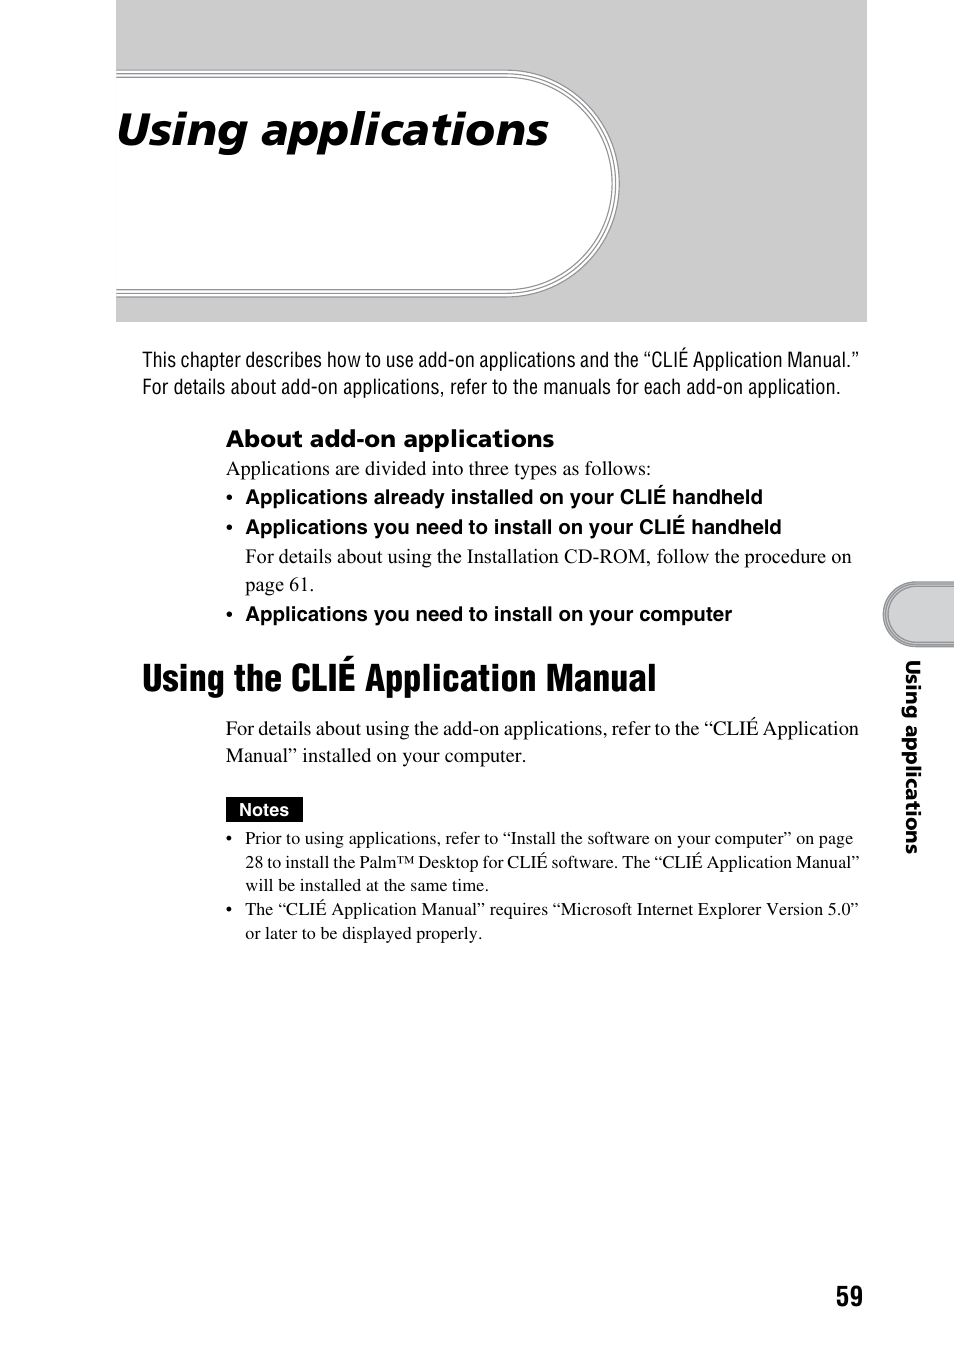 Using applications, Using the clié application manual | Sony PEG-TG50 User Manual | Page 59 / 100